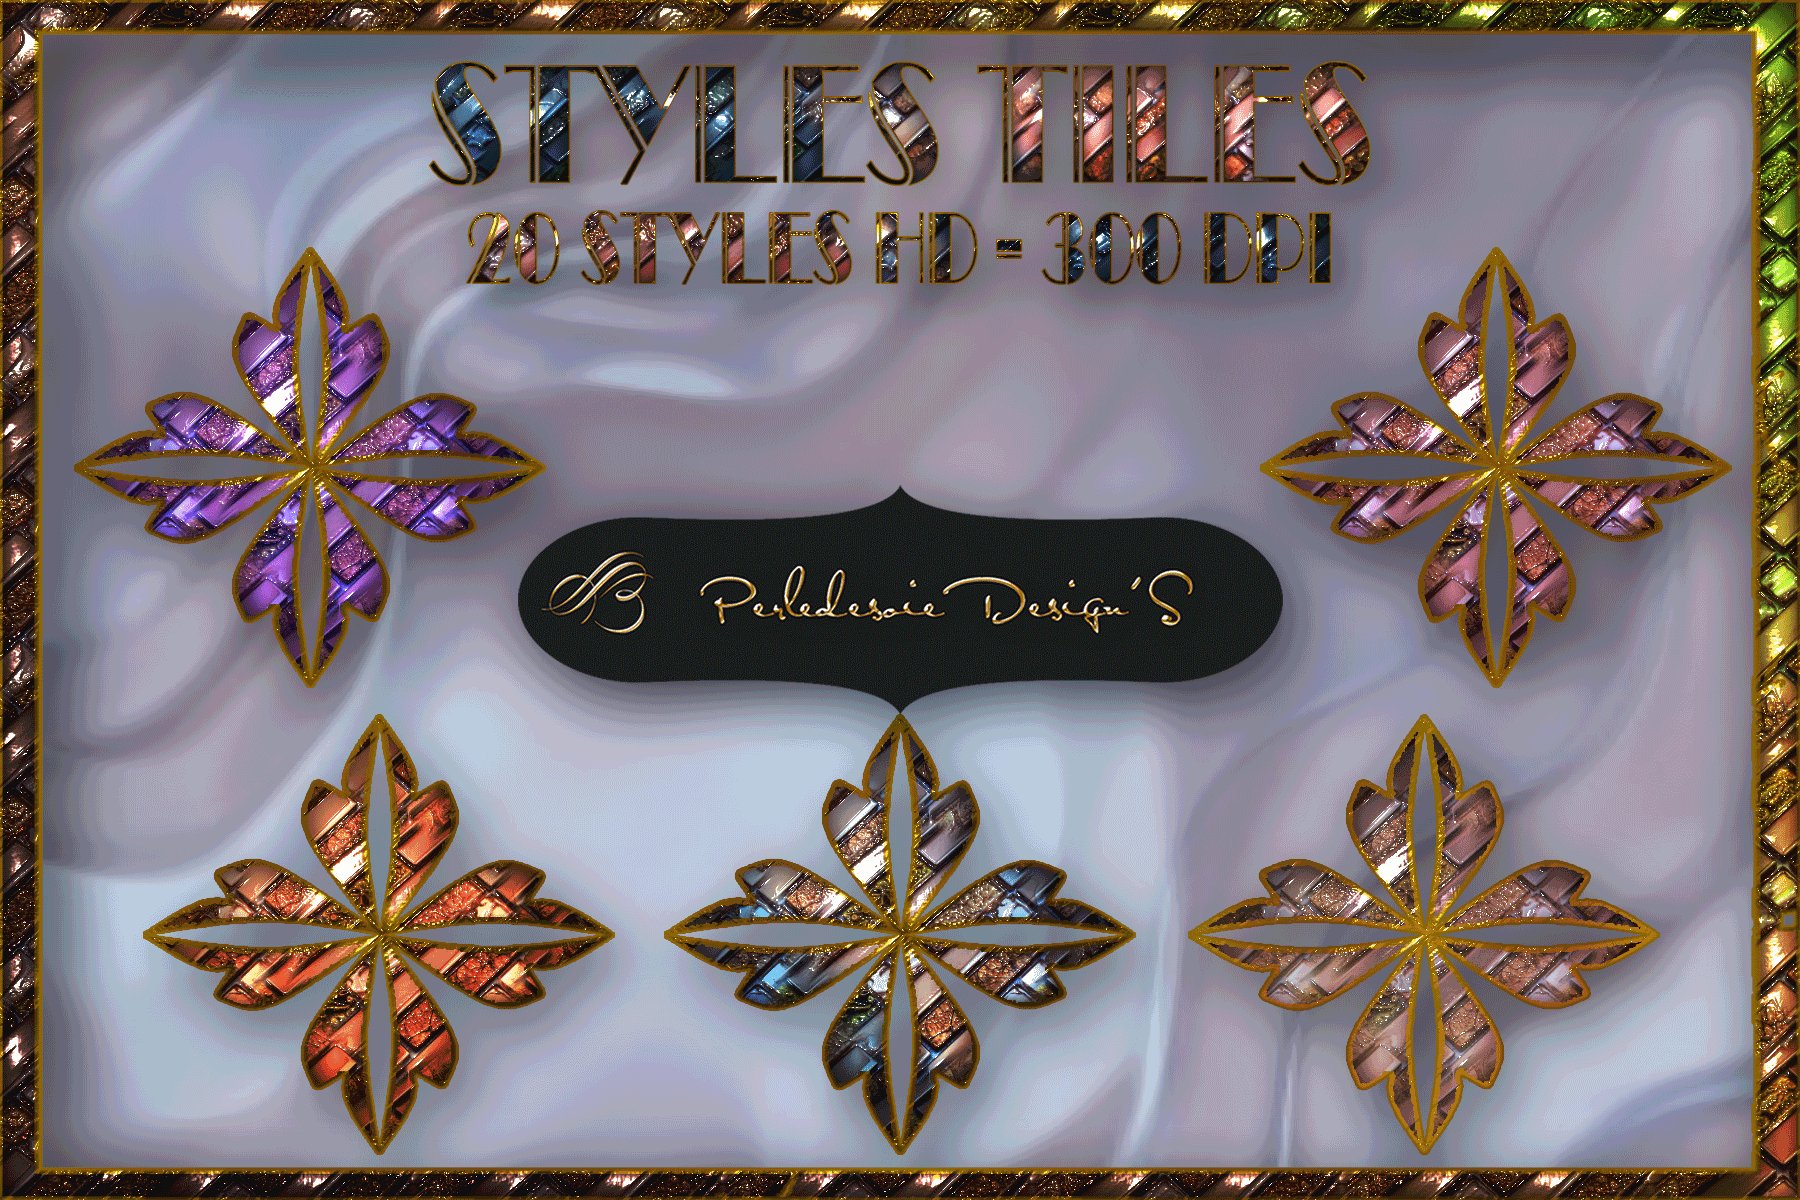 Styles Tilespreview image.